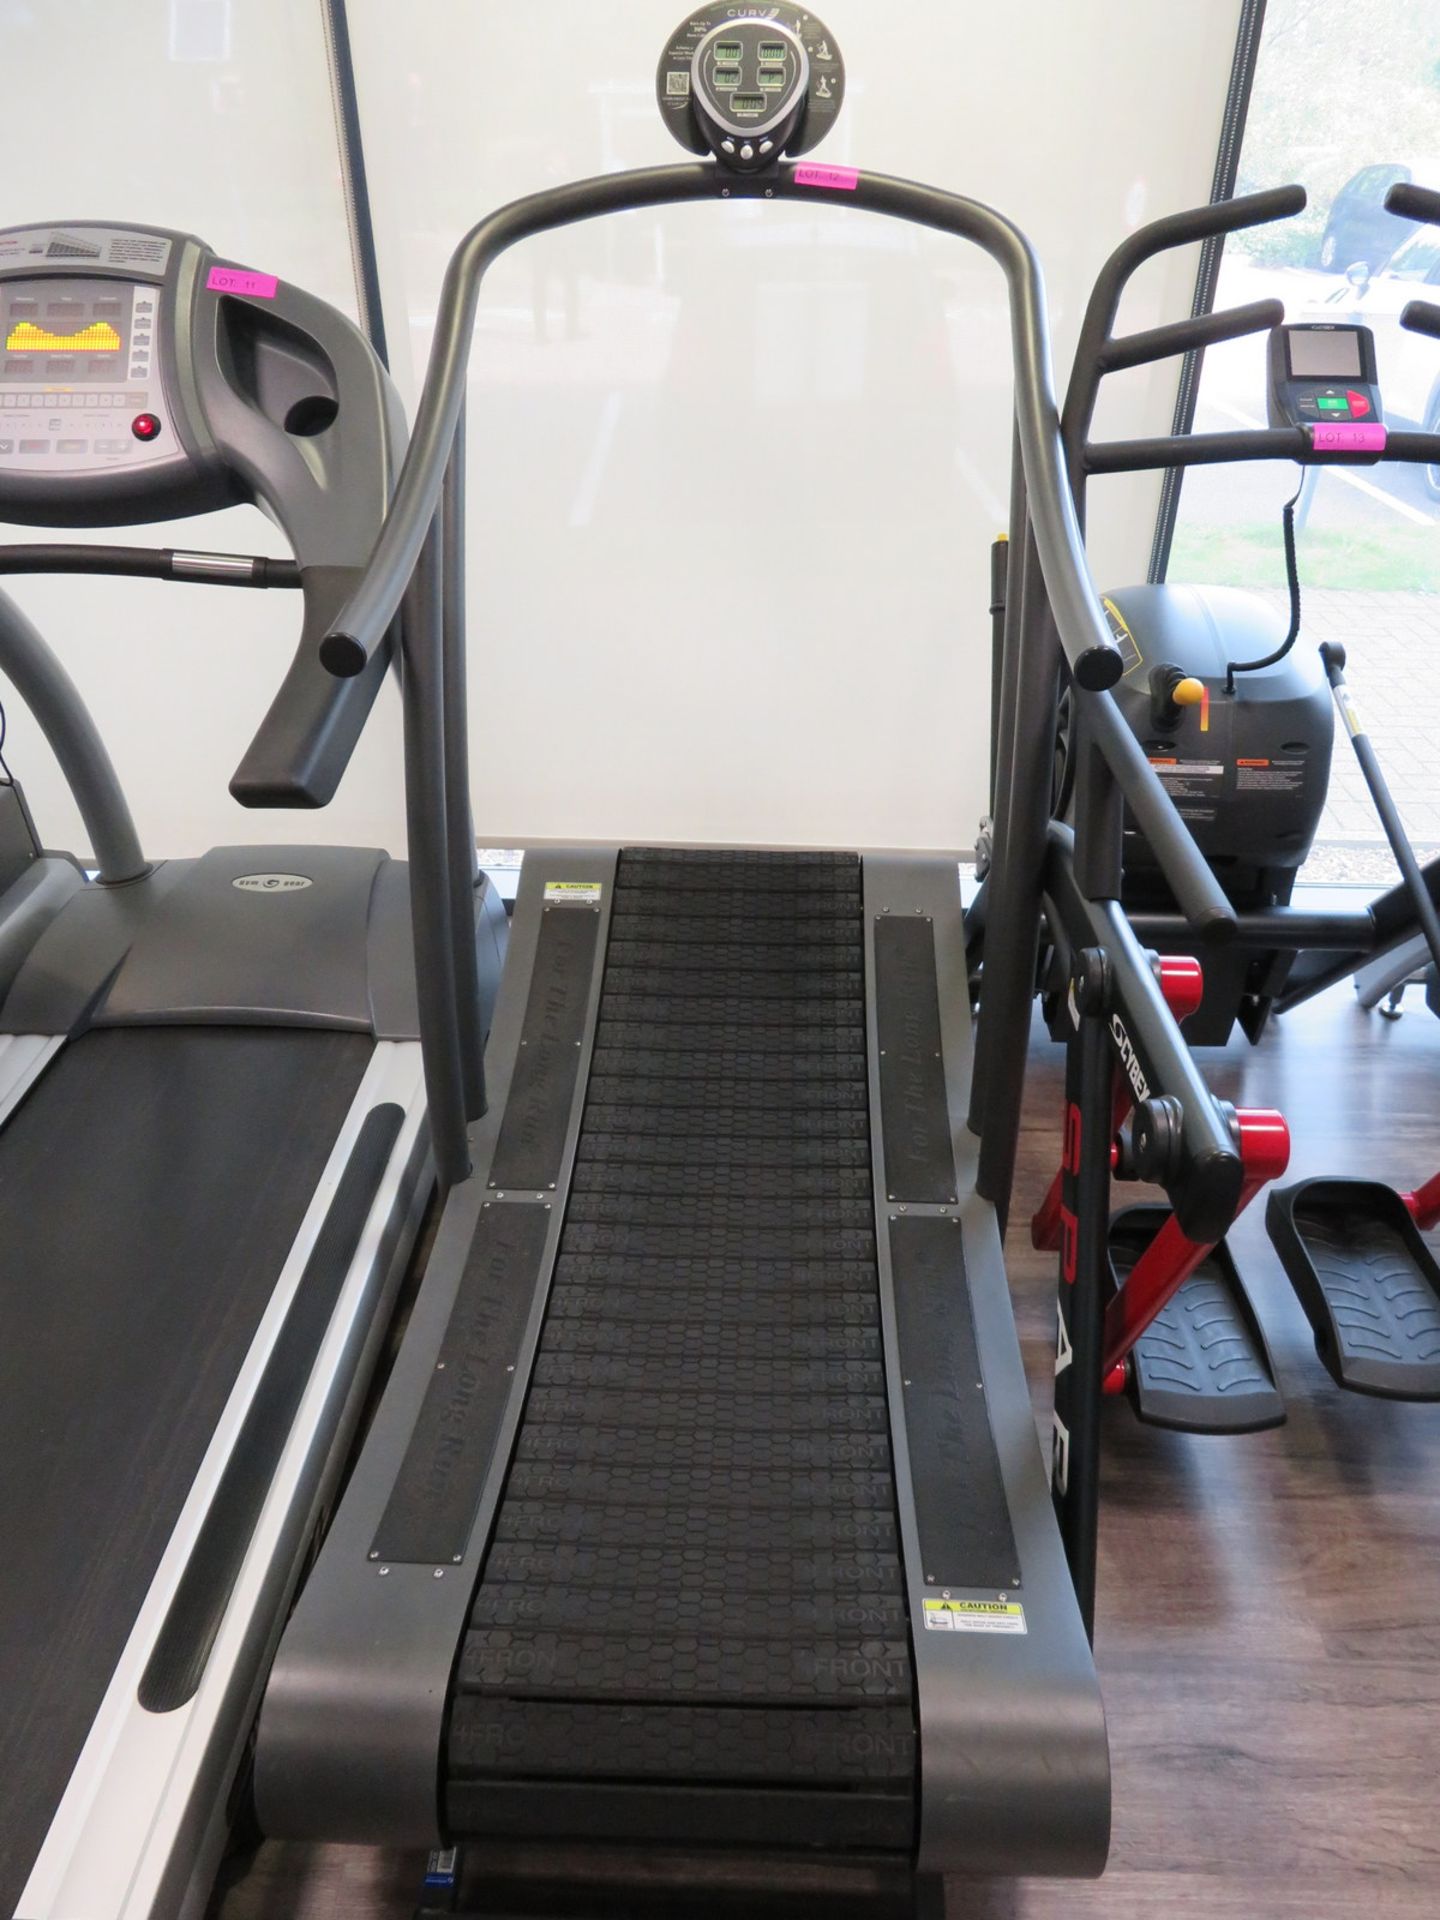 Woodway Curv Treadmill. Digital Display. Good Working Condition. - Image 2 of 9